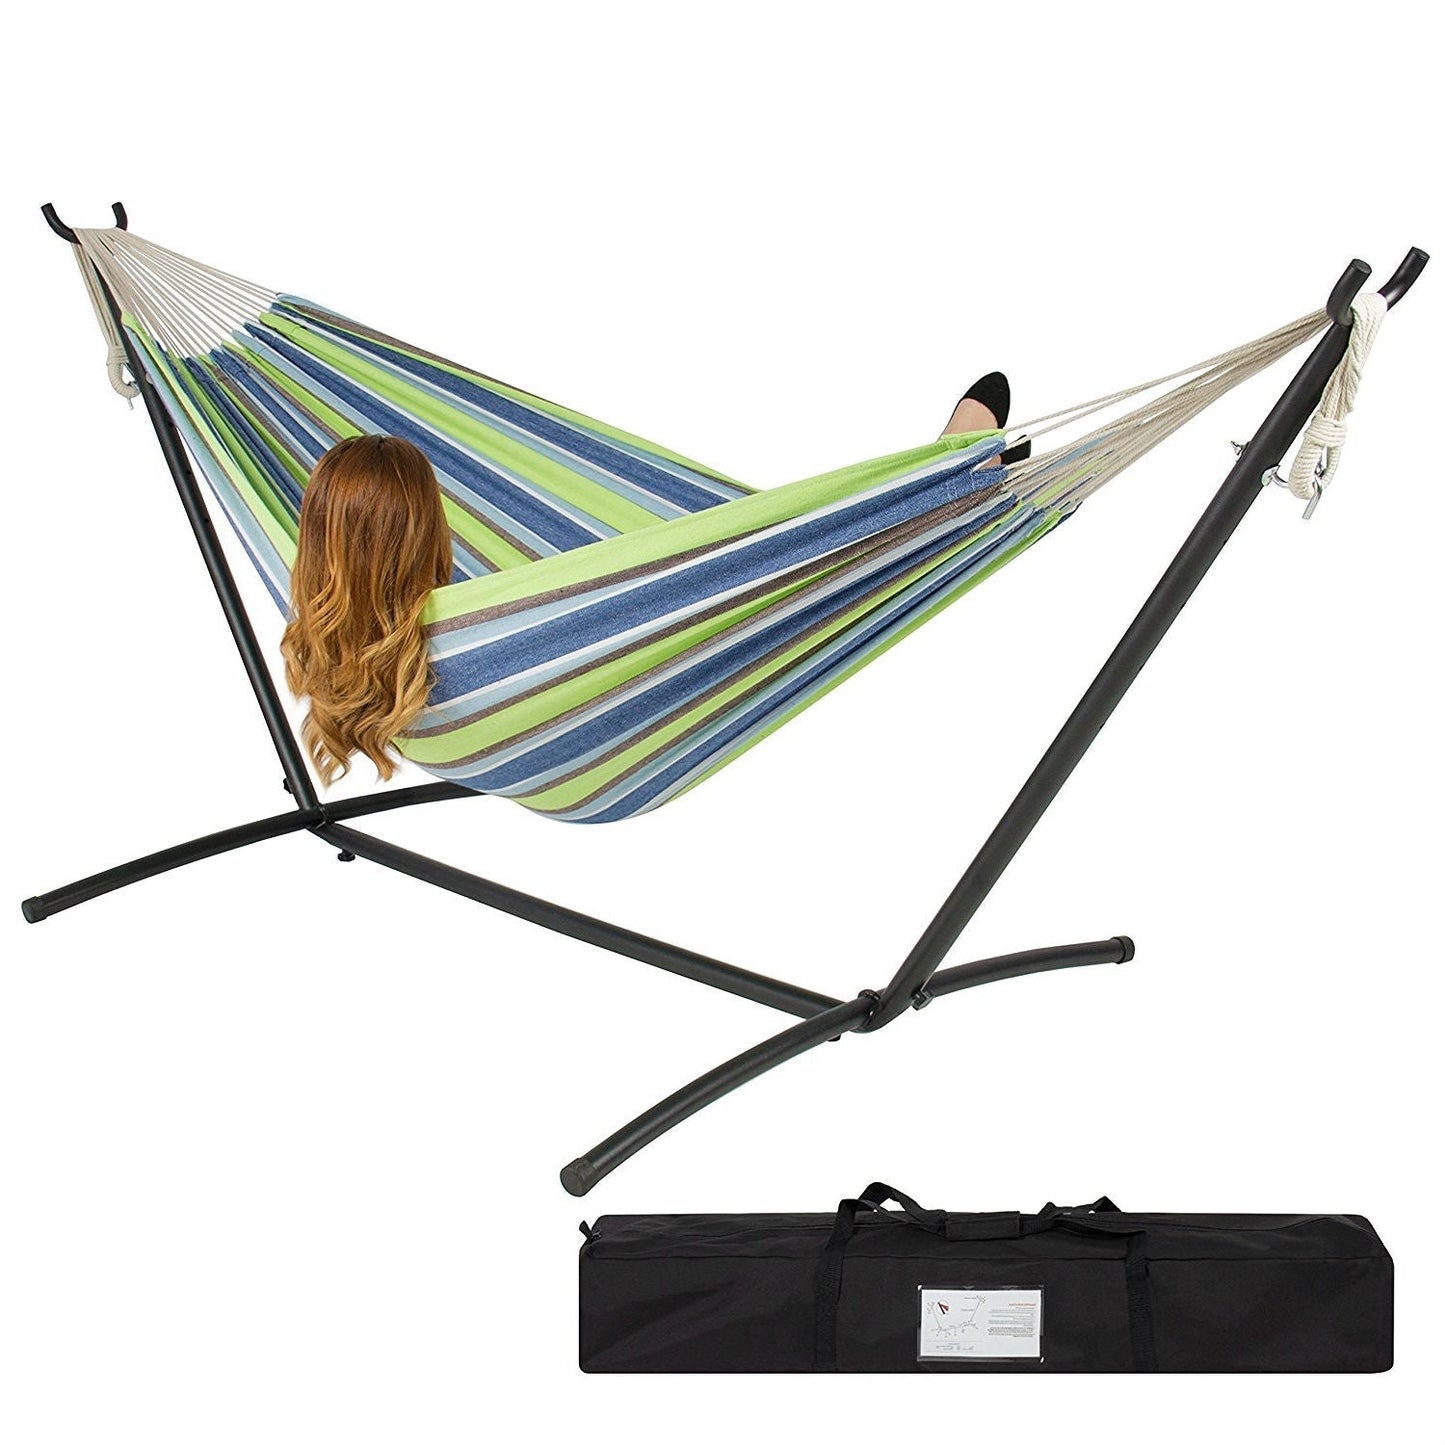 Outdoor > Outdoor Furniture > Hammocks - Portable Blue Green Stripe Cotton Hammock With Metal Stand And Carry Case